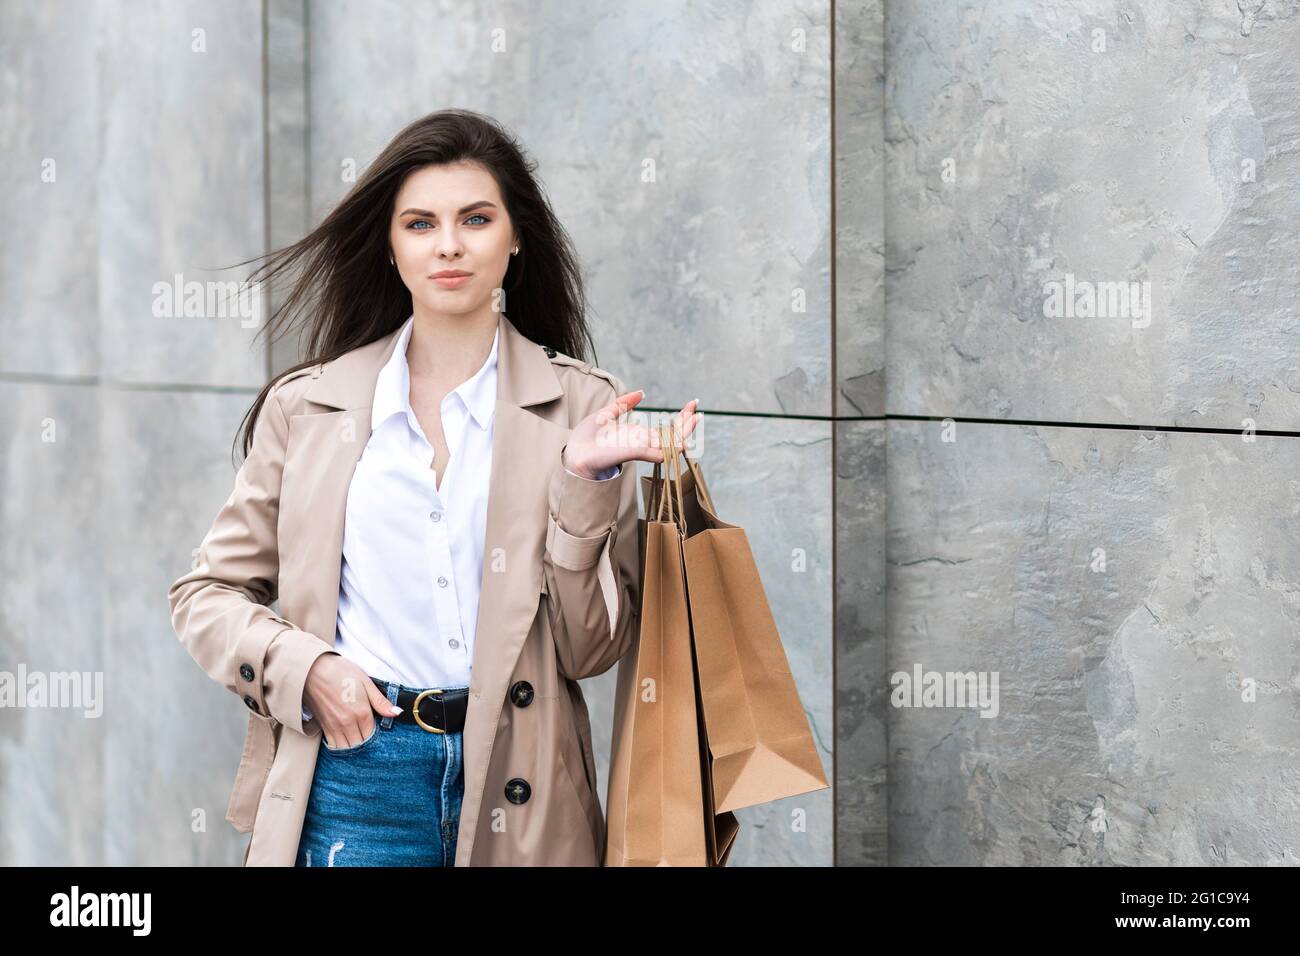 https://c8.alamy.com/comp/2G1C9Y4/a-girl-in-a-casual-clothes-with-shopping-bags-and-lots-of-purchases-near-the-shopping-center-smiling-hands-you-her-package-consumerism-sale-and-peopl-2G1C9Y4.jpg